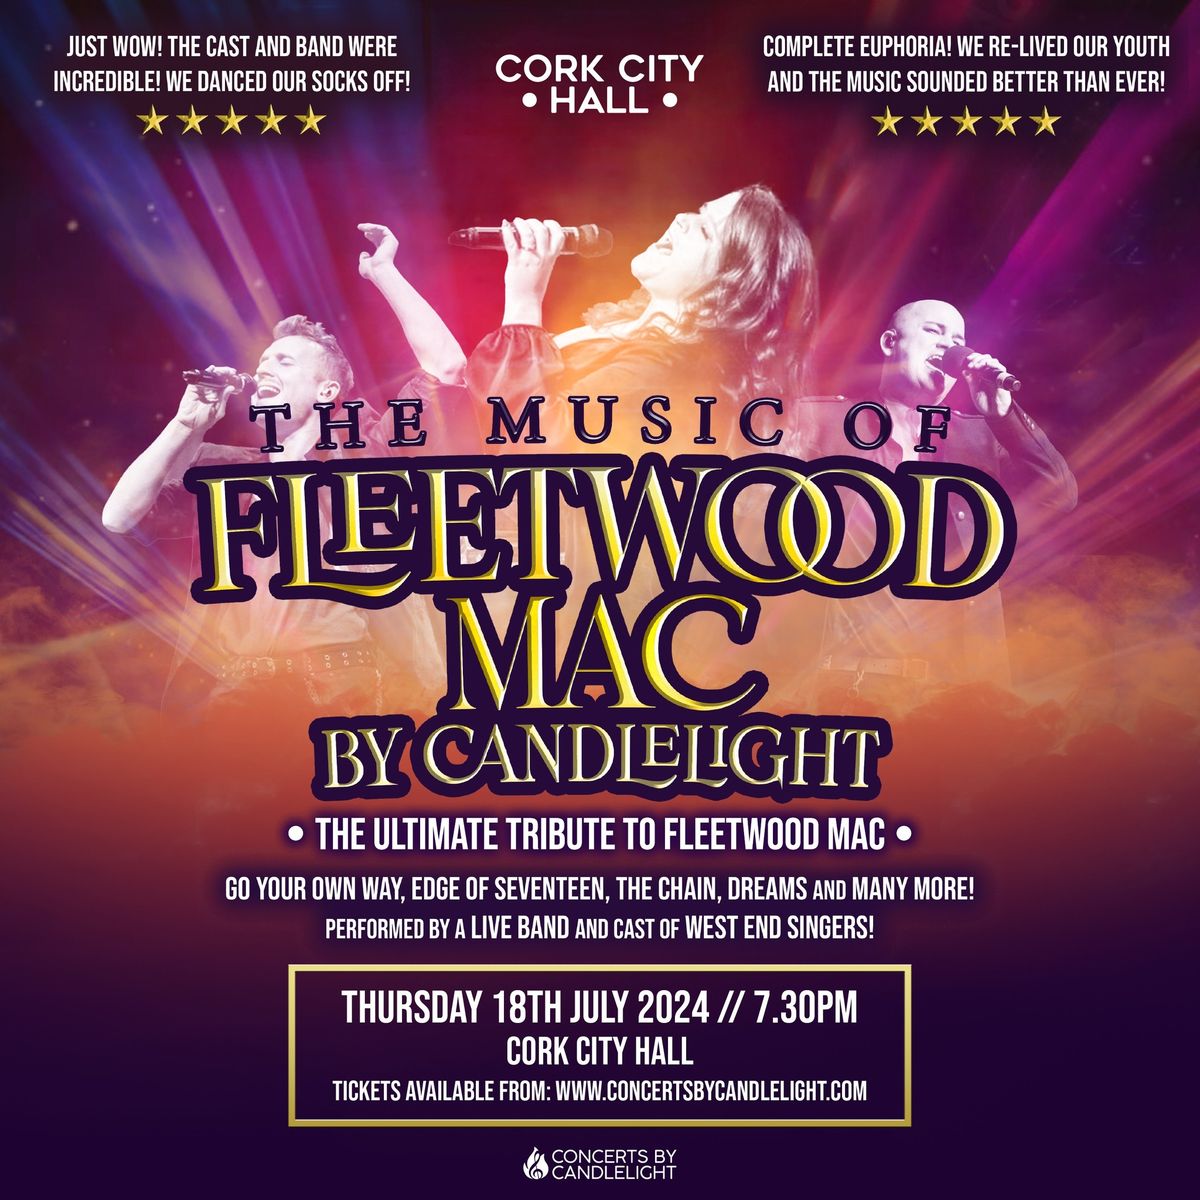 The Music Of Fleetwood Mac By Candlelight At Cork City Hall